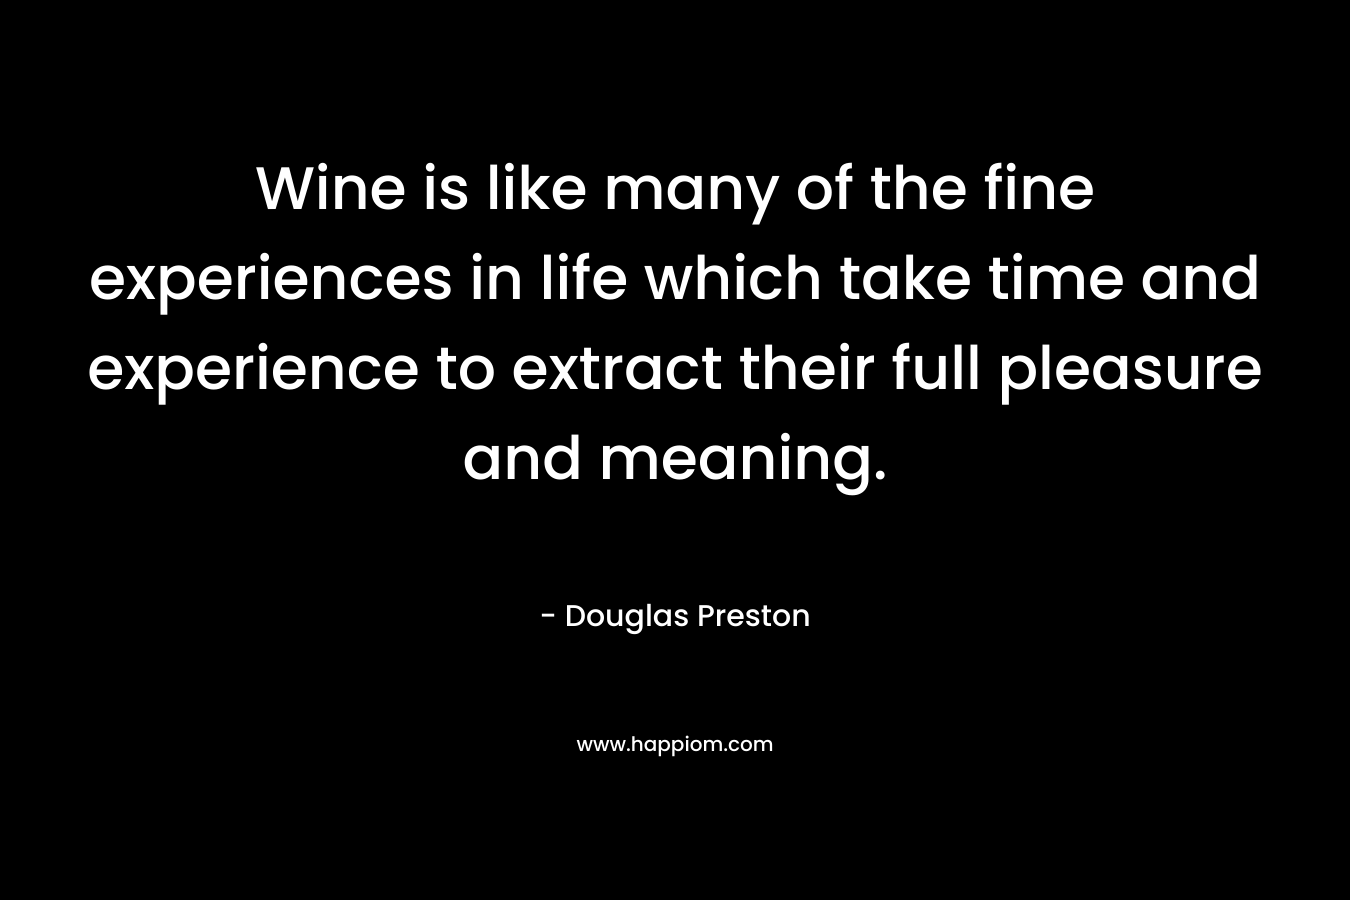 Wine is like many of the fine experiences in life which take time and experience to extract their full pleasure and meaning. – Douglas Preston